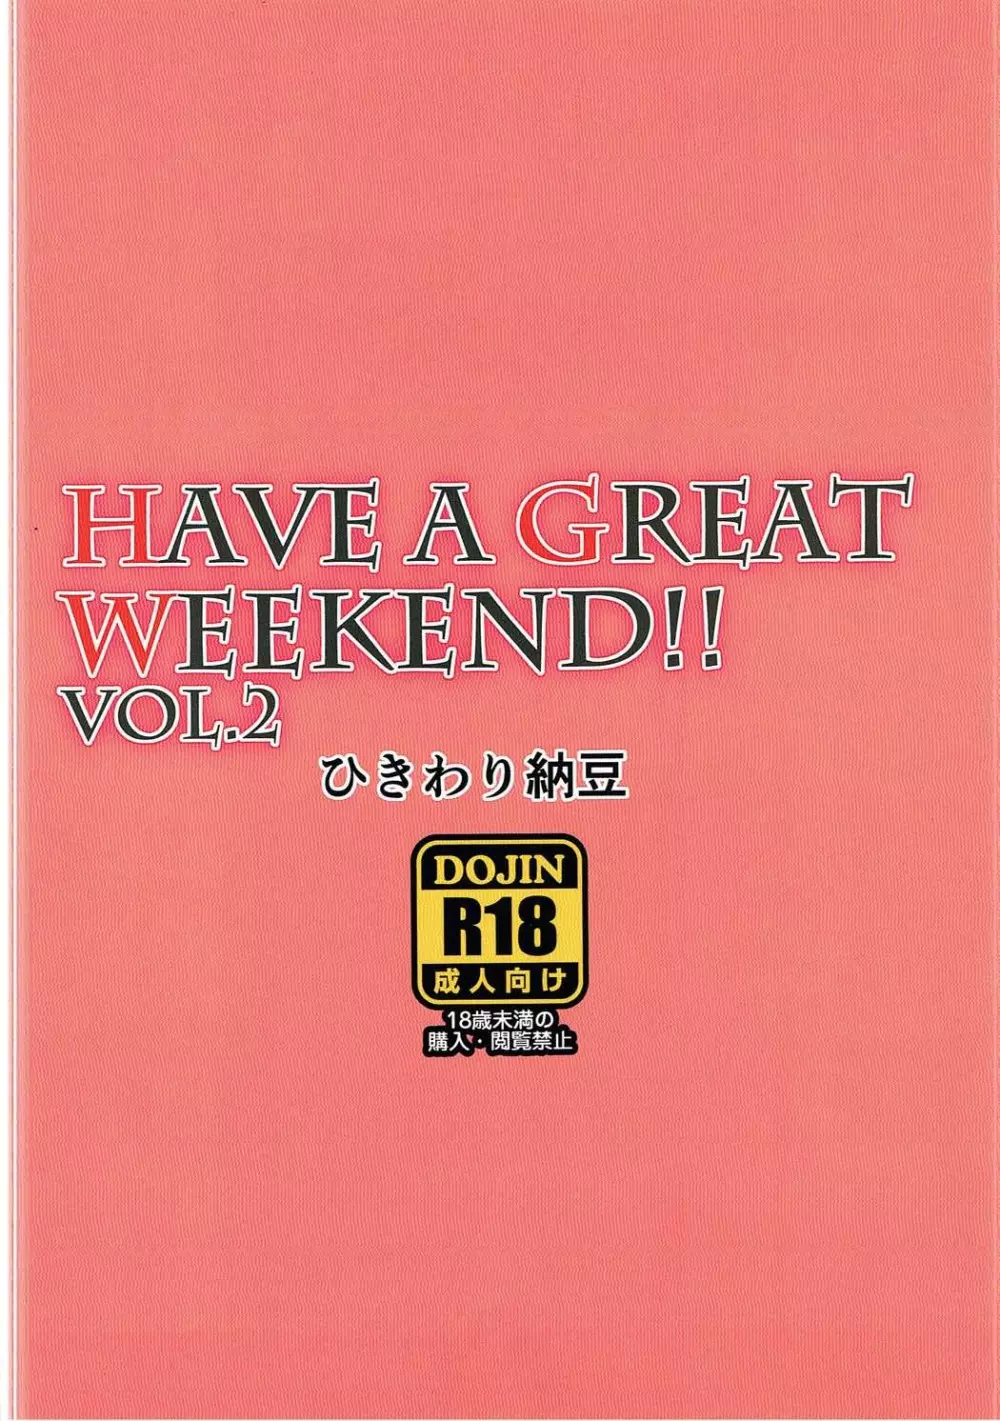 HAVE A GREAT WEEKEND!! VOL.2 37ページ